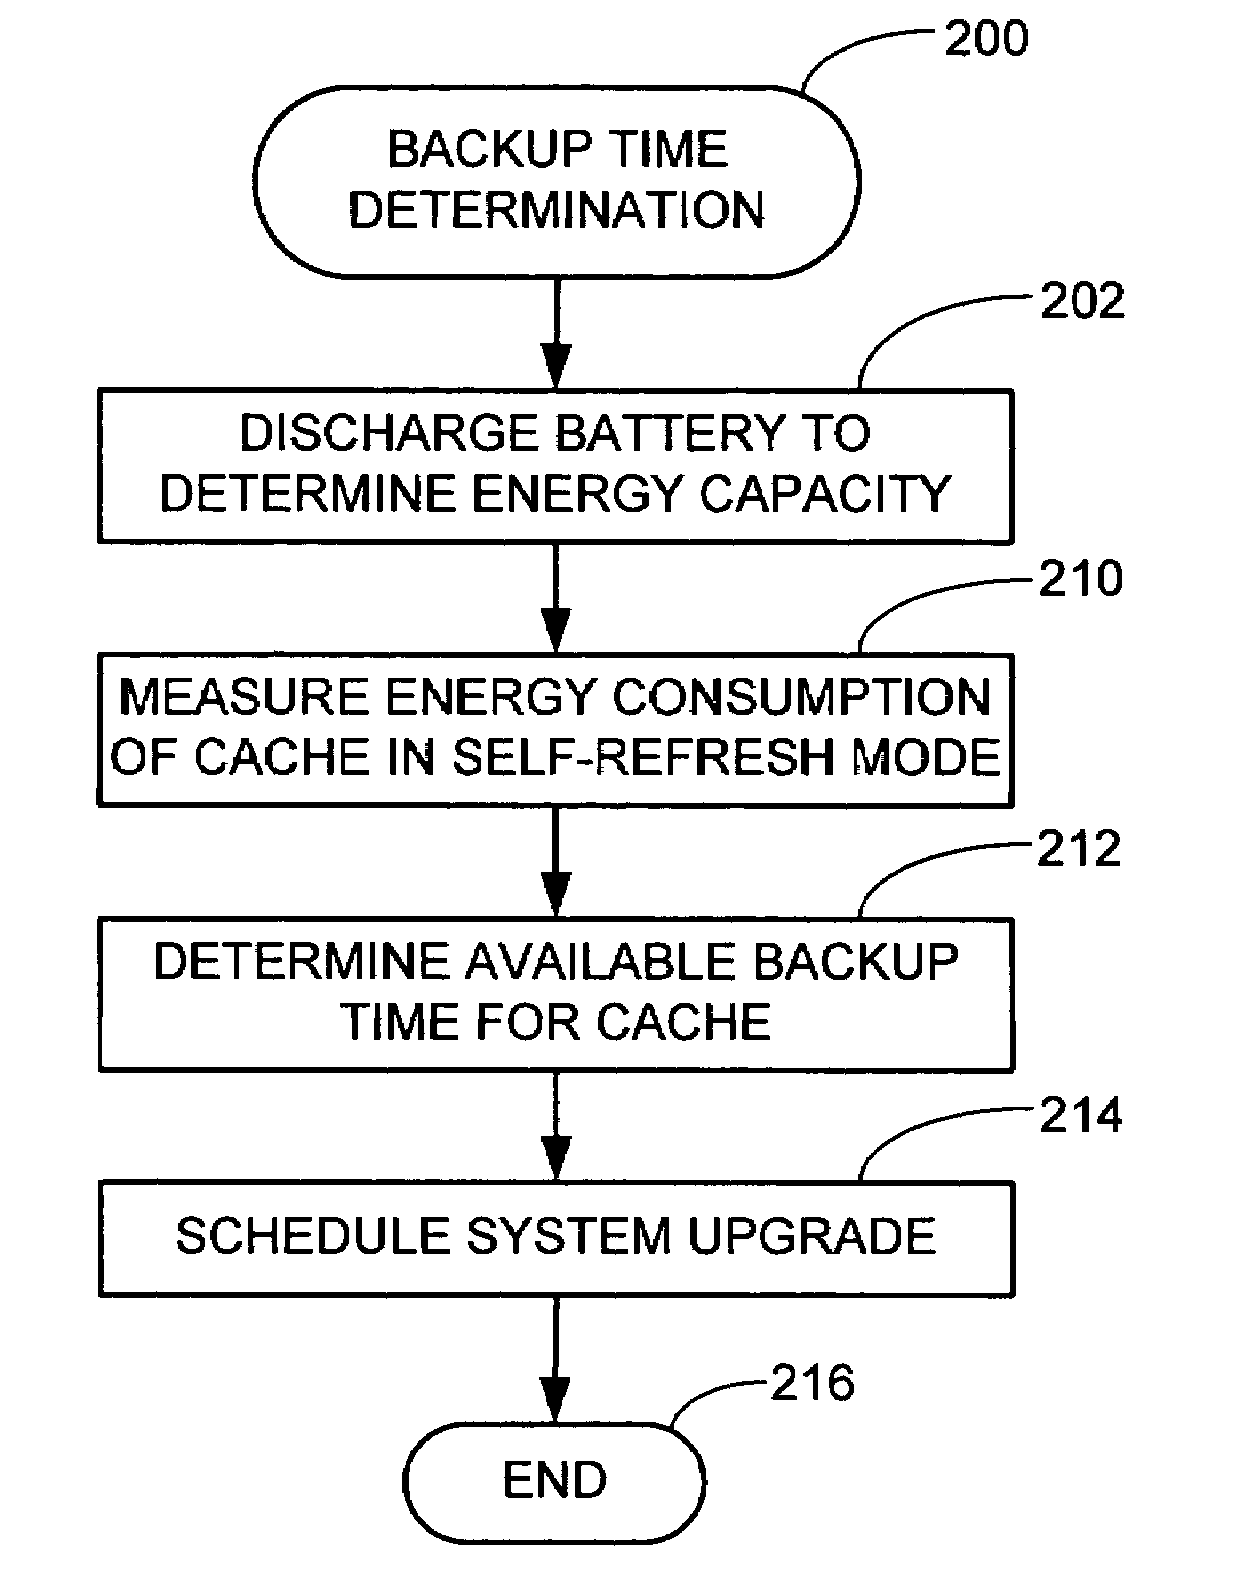 Assessing energy requirements for a refreshed device